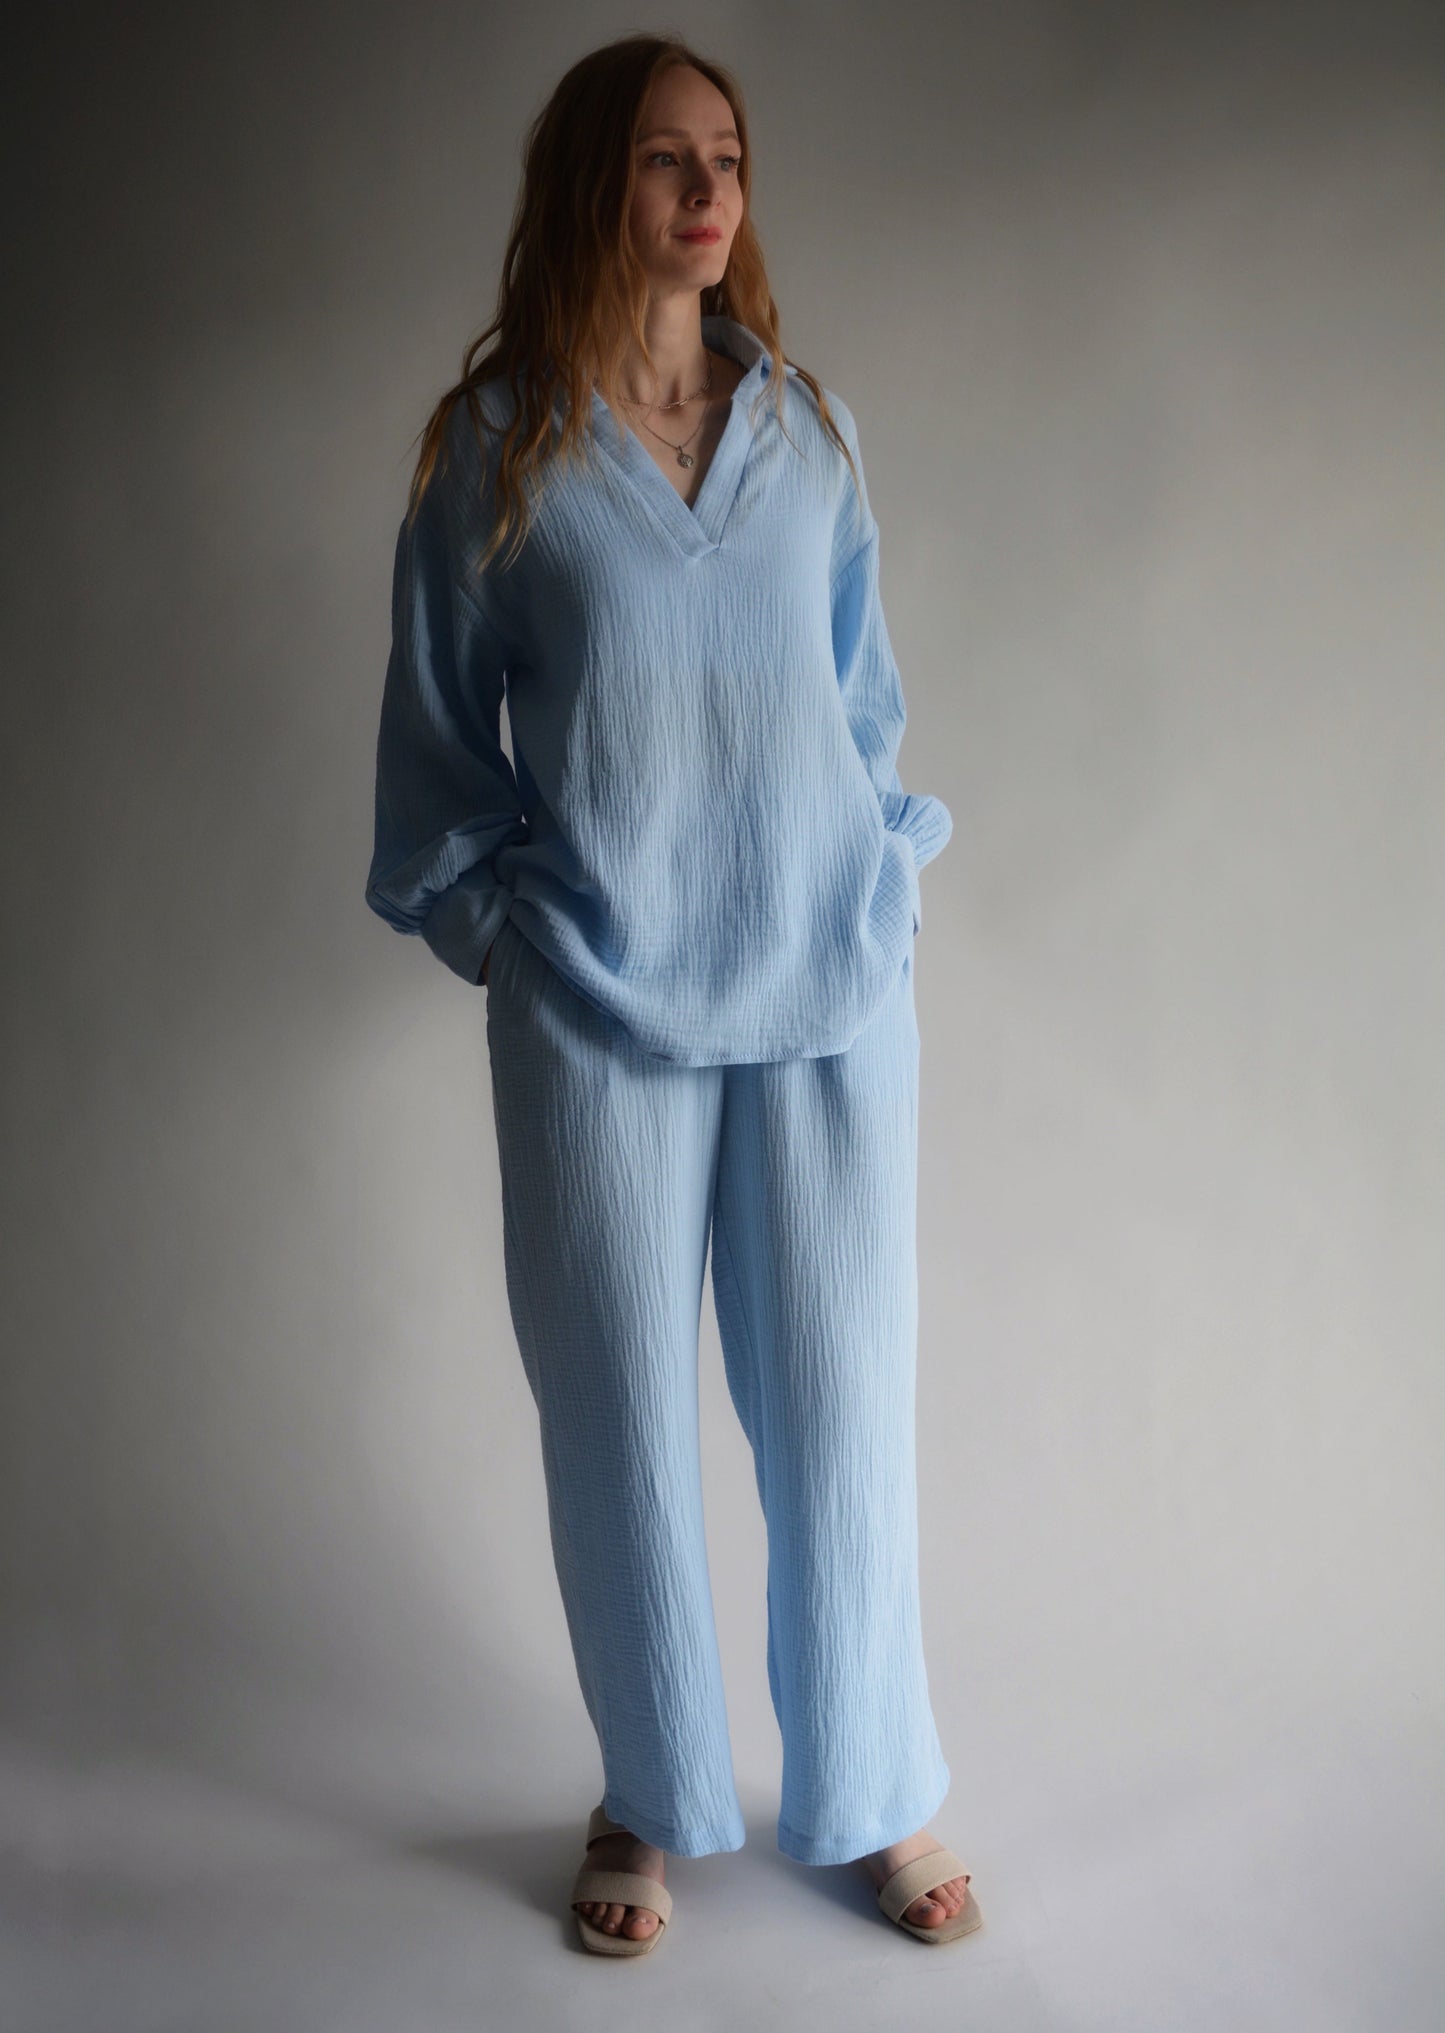 Cotton Muslin Two-Piece Set: Top and Pants in Light Blue